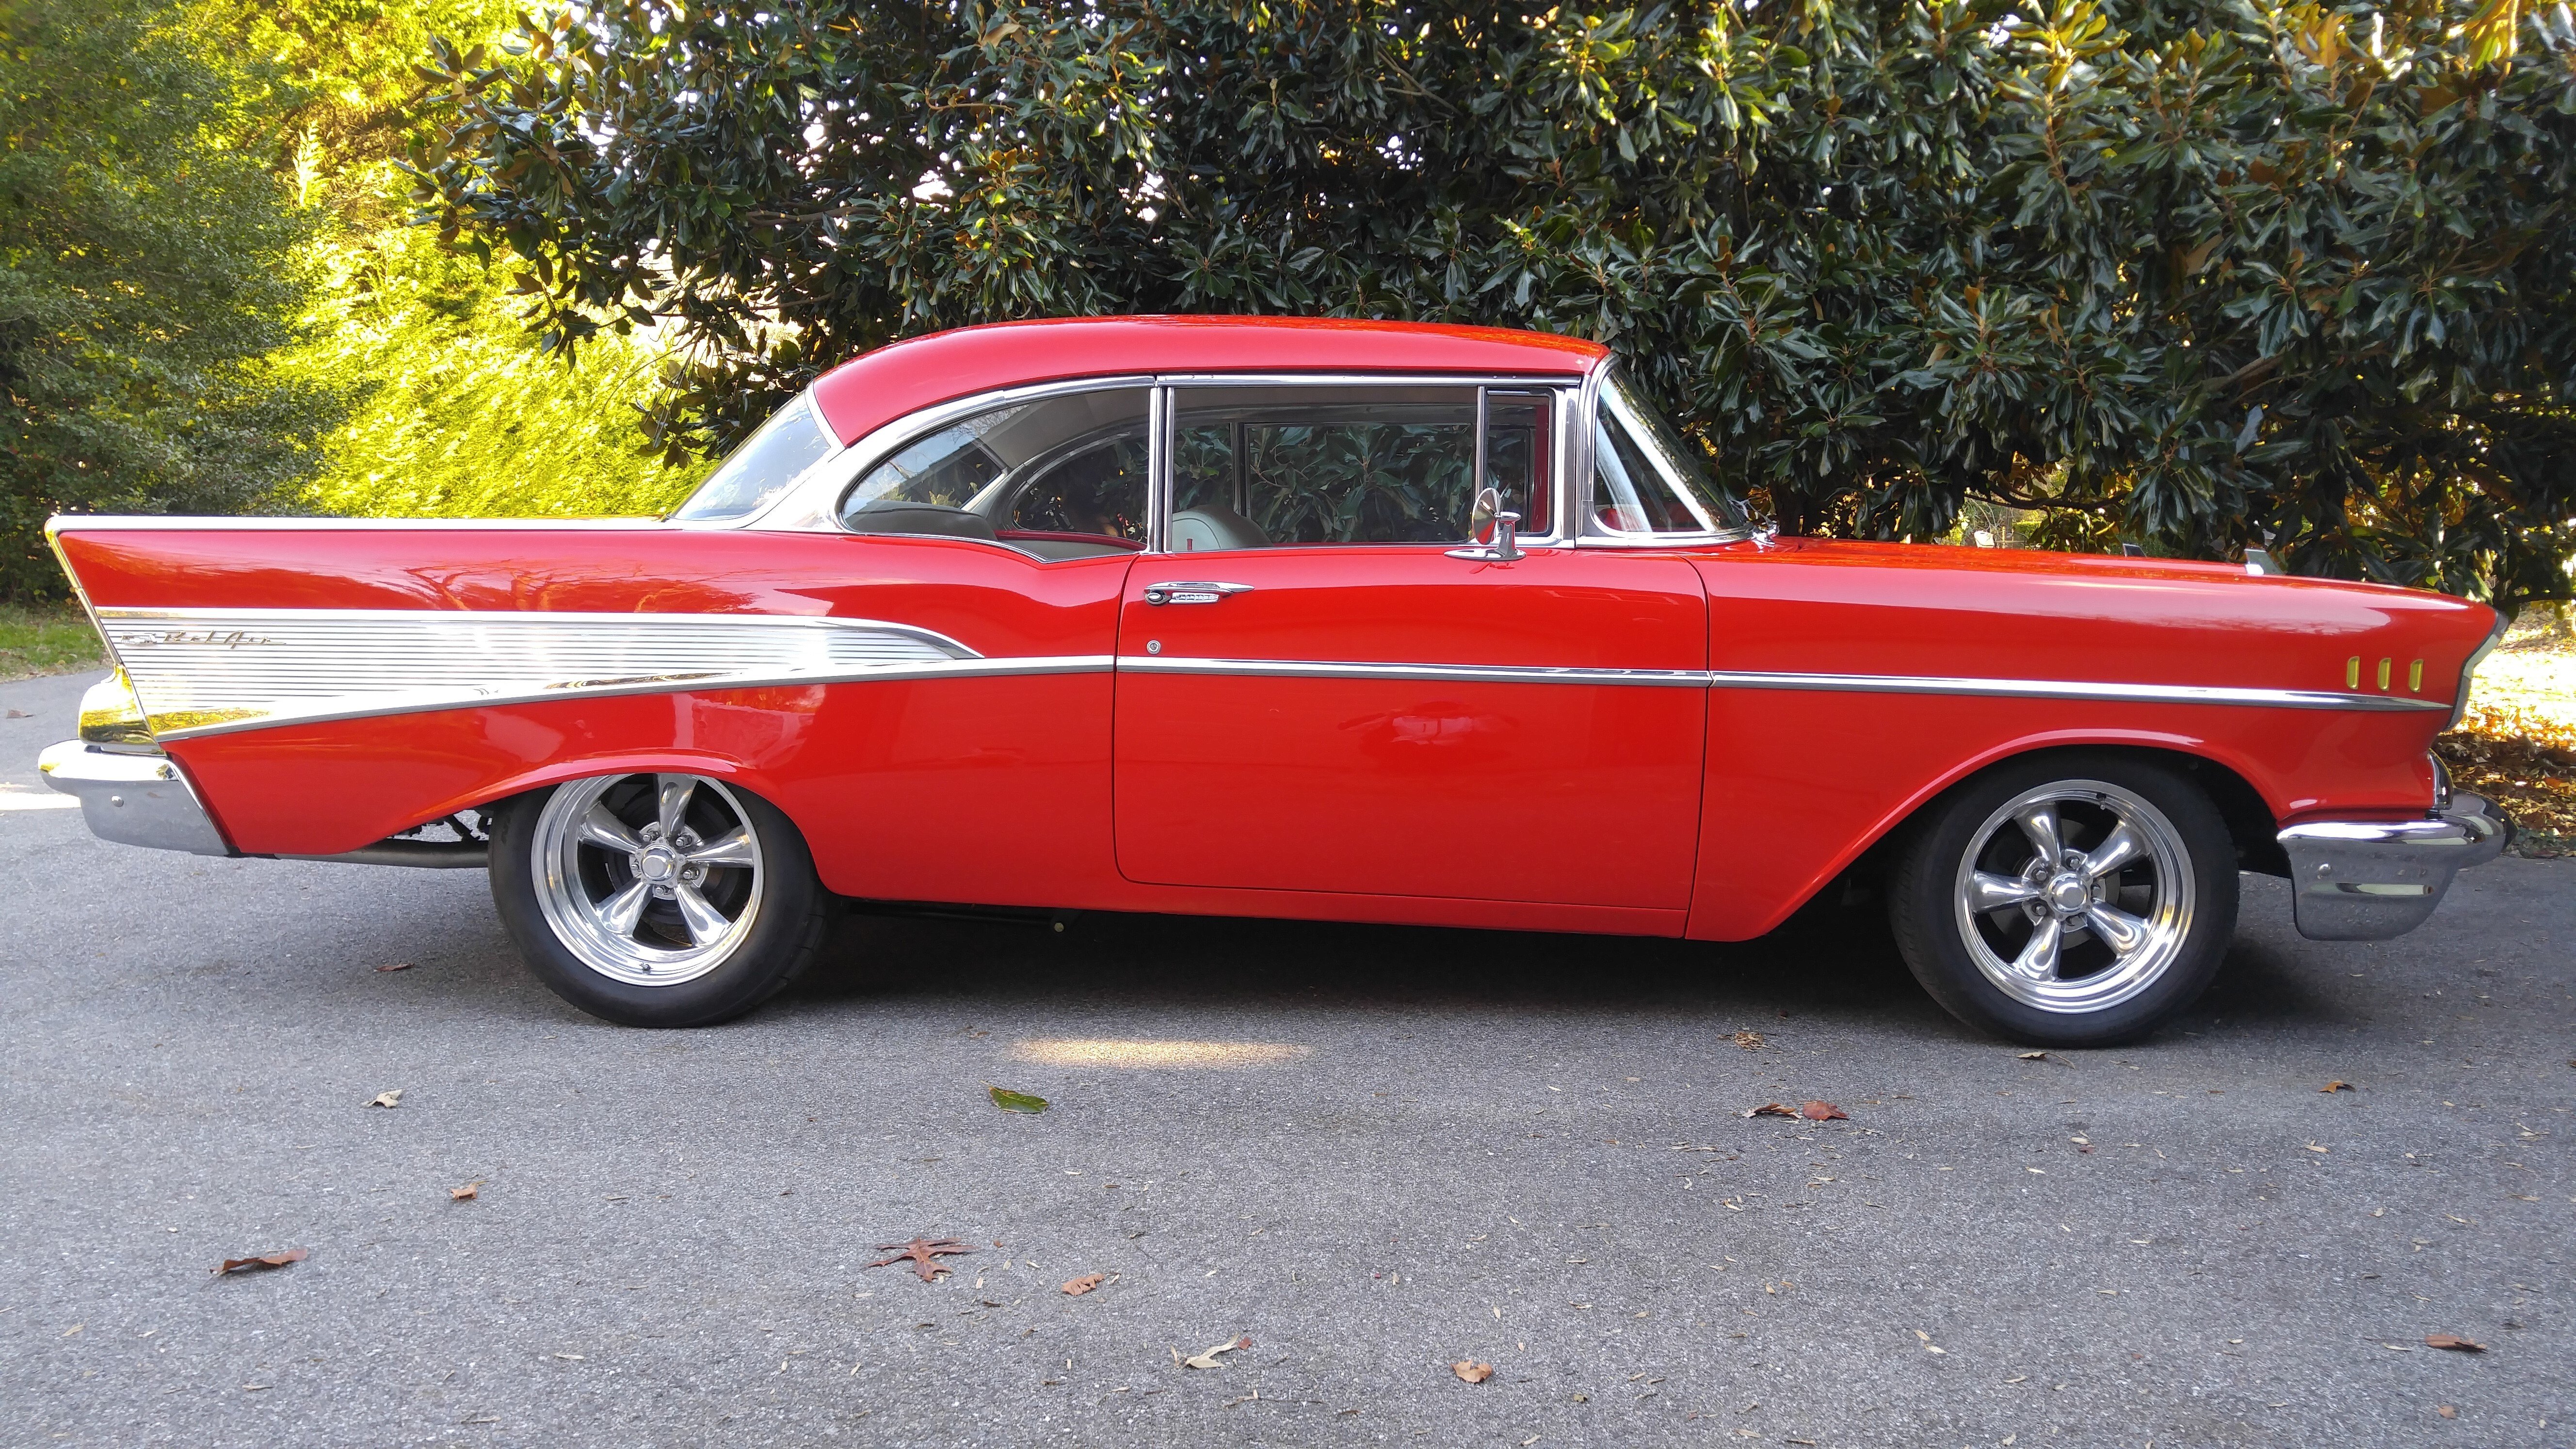 1957 Chevrolet Bel Air for sale near Annapolis, Maryland 21409 ...